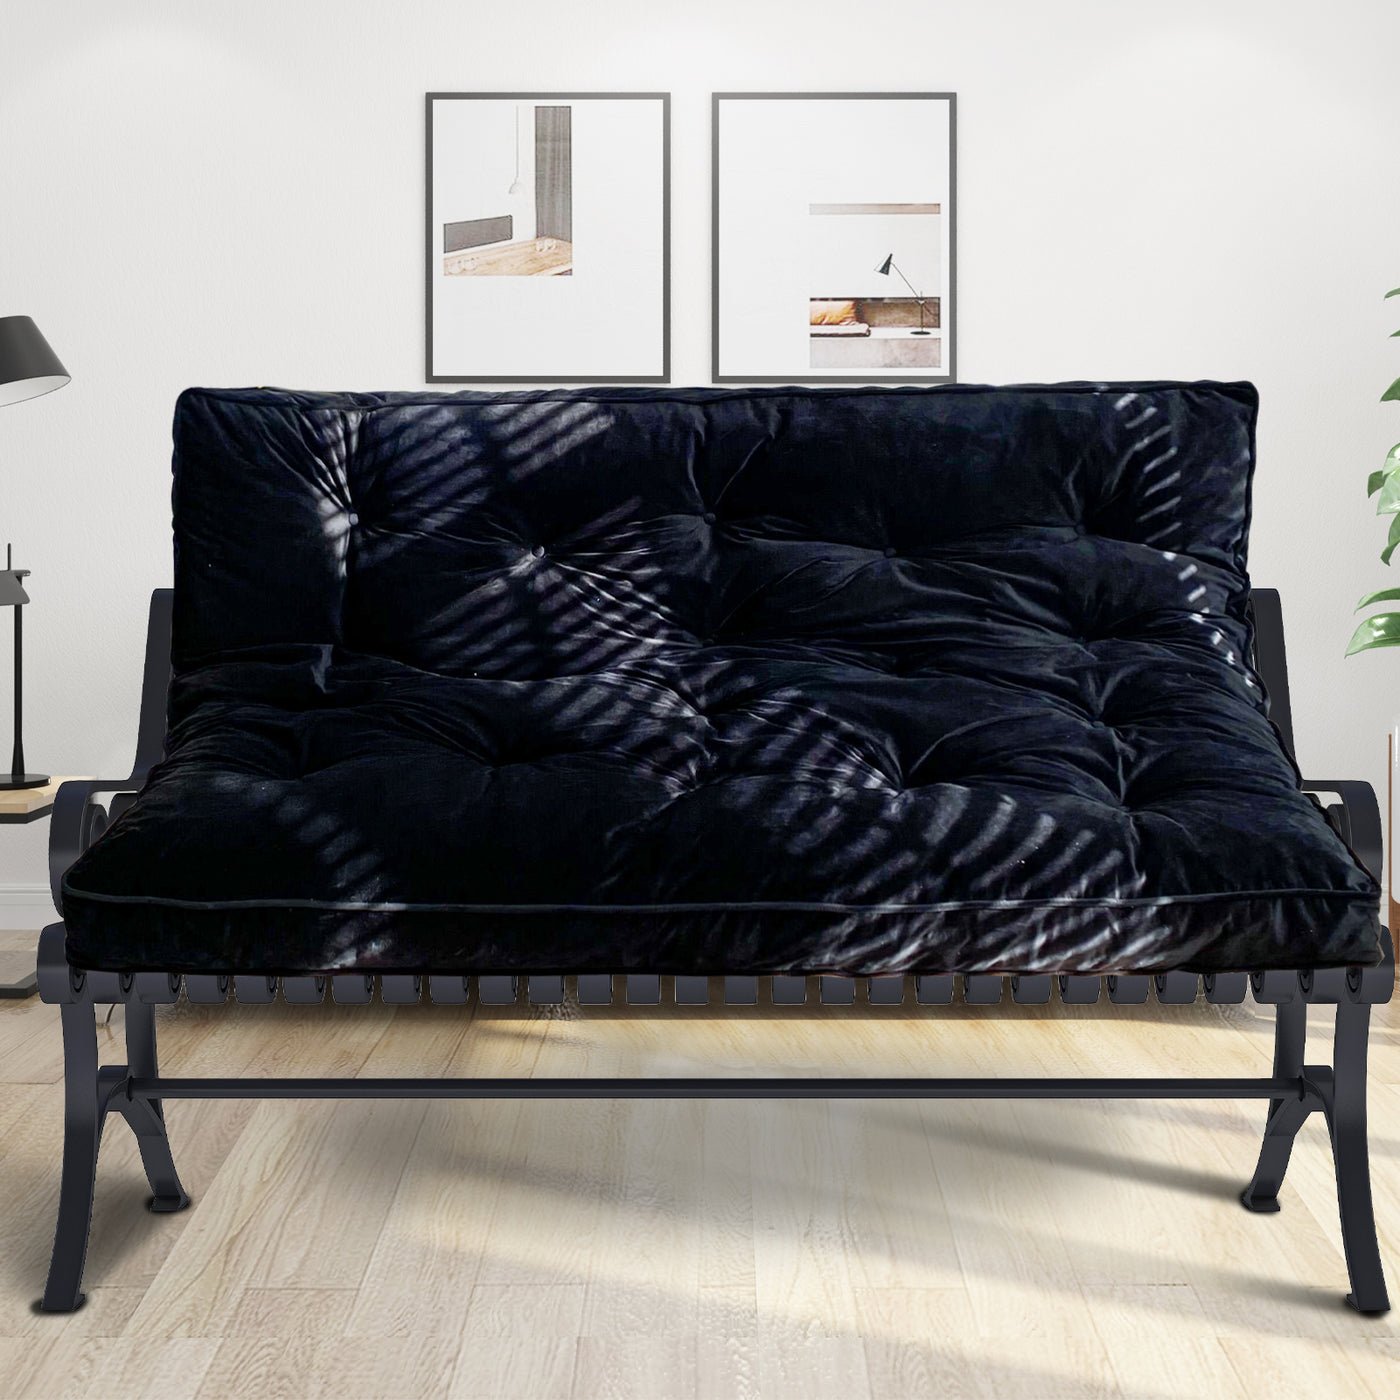 MAXYOYO 6" Thick Futons Sofa Couch Bed, Velvet Twin Size Futon Mattress for Adults (Mattress Only), Black